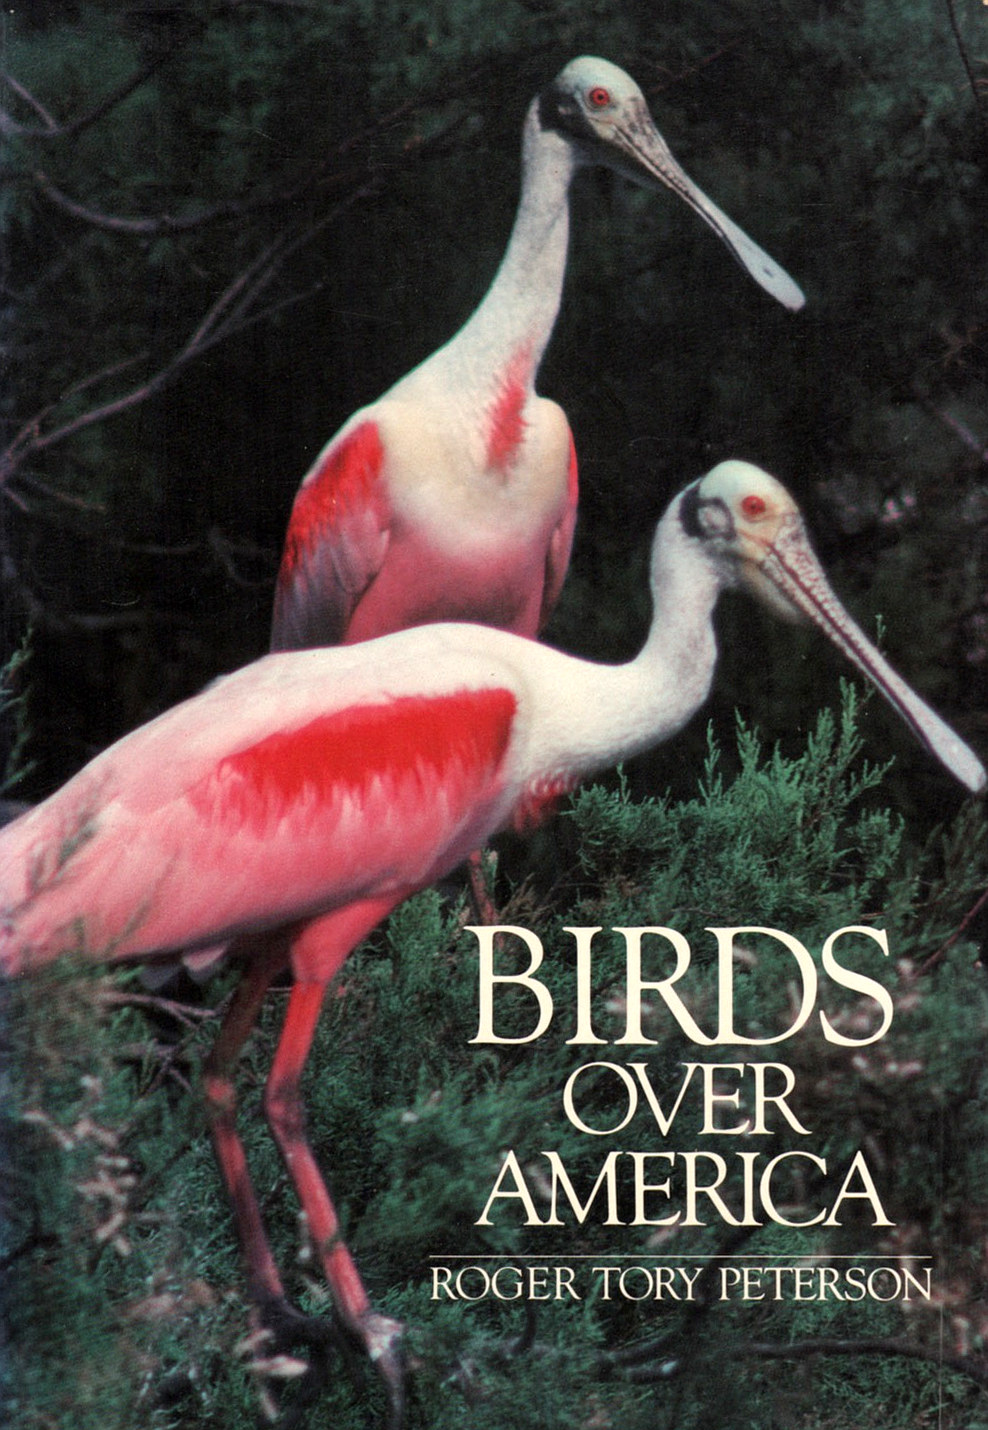 Birds Over America (Roger Tory Peterson)